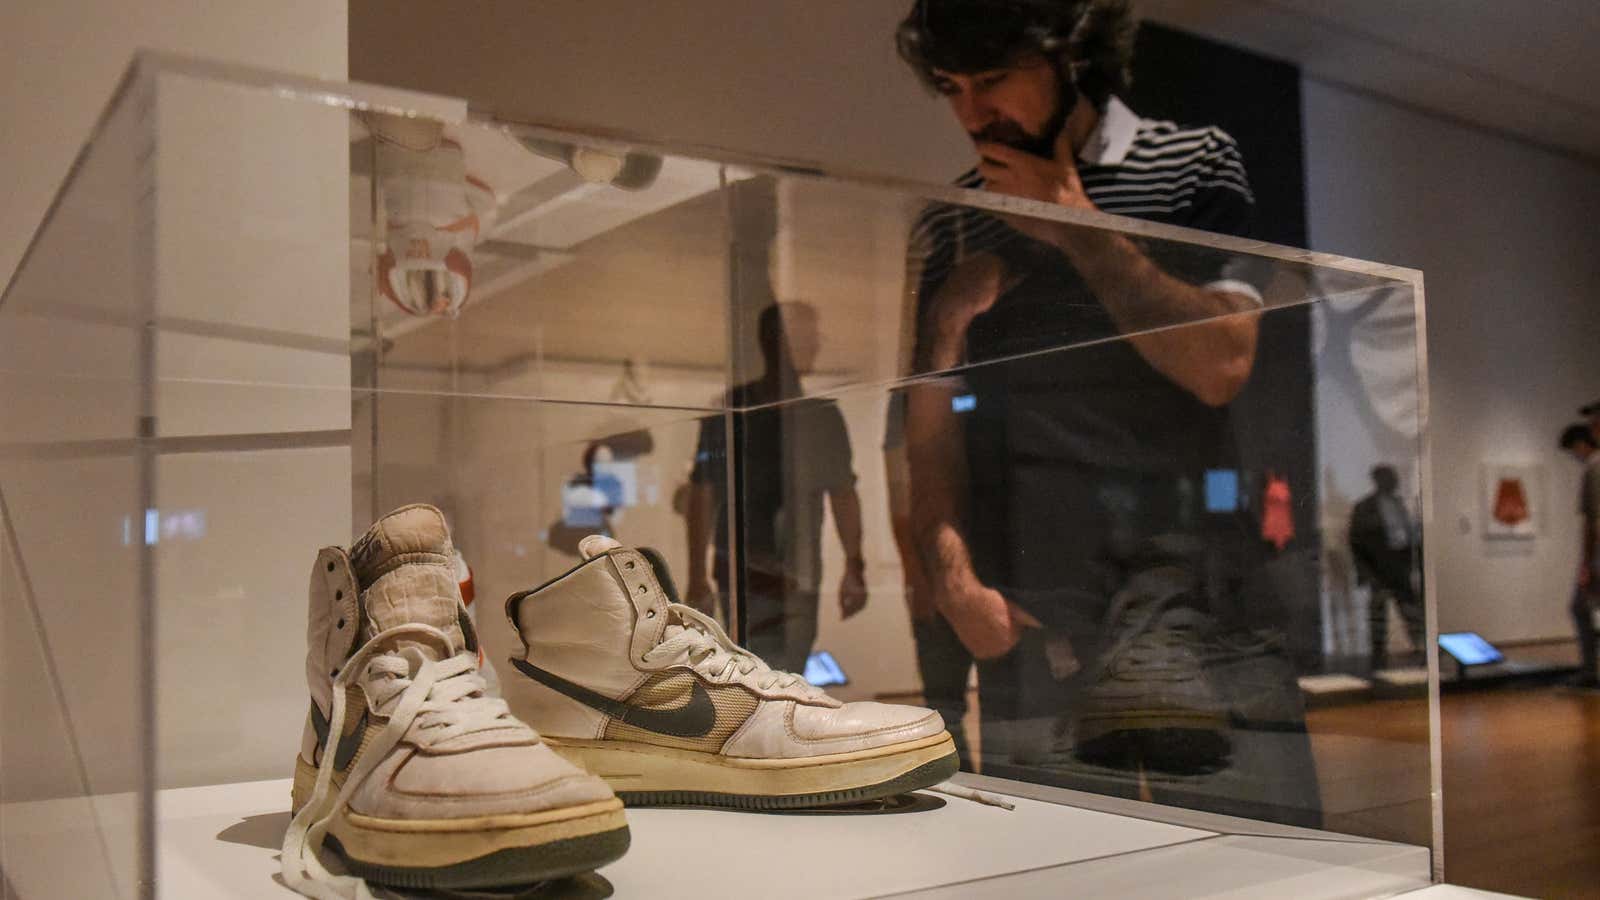 A pair of leather sneakers is like a museum artifact now.